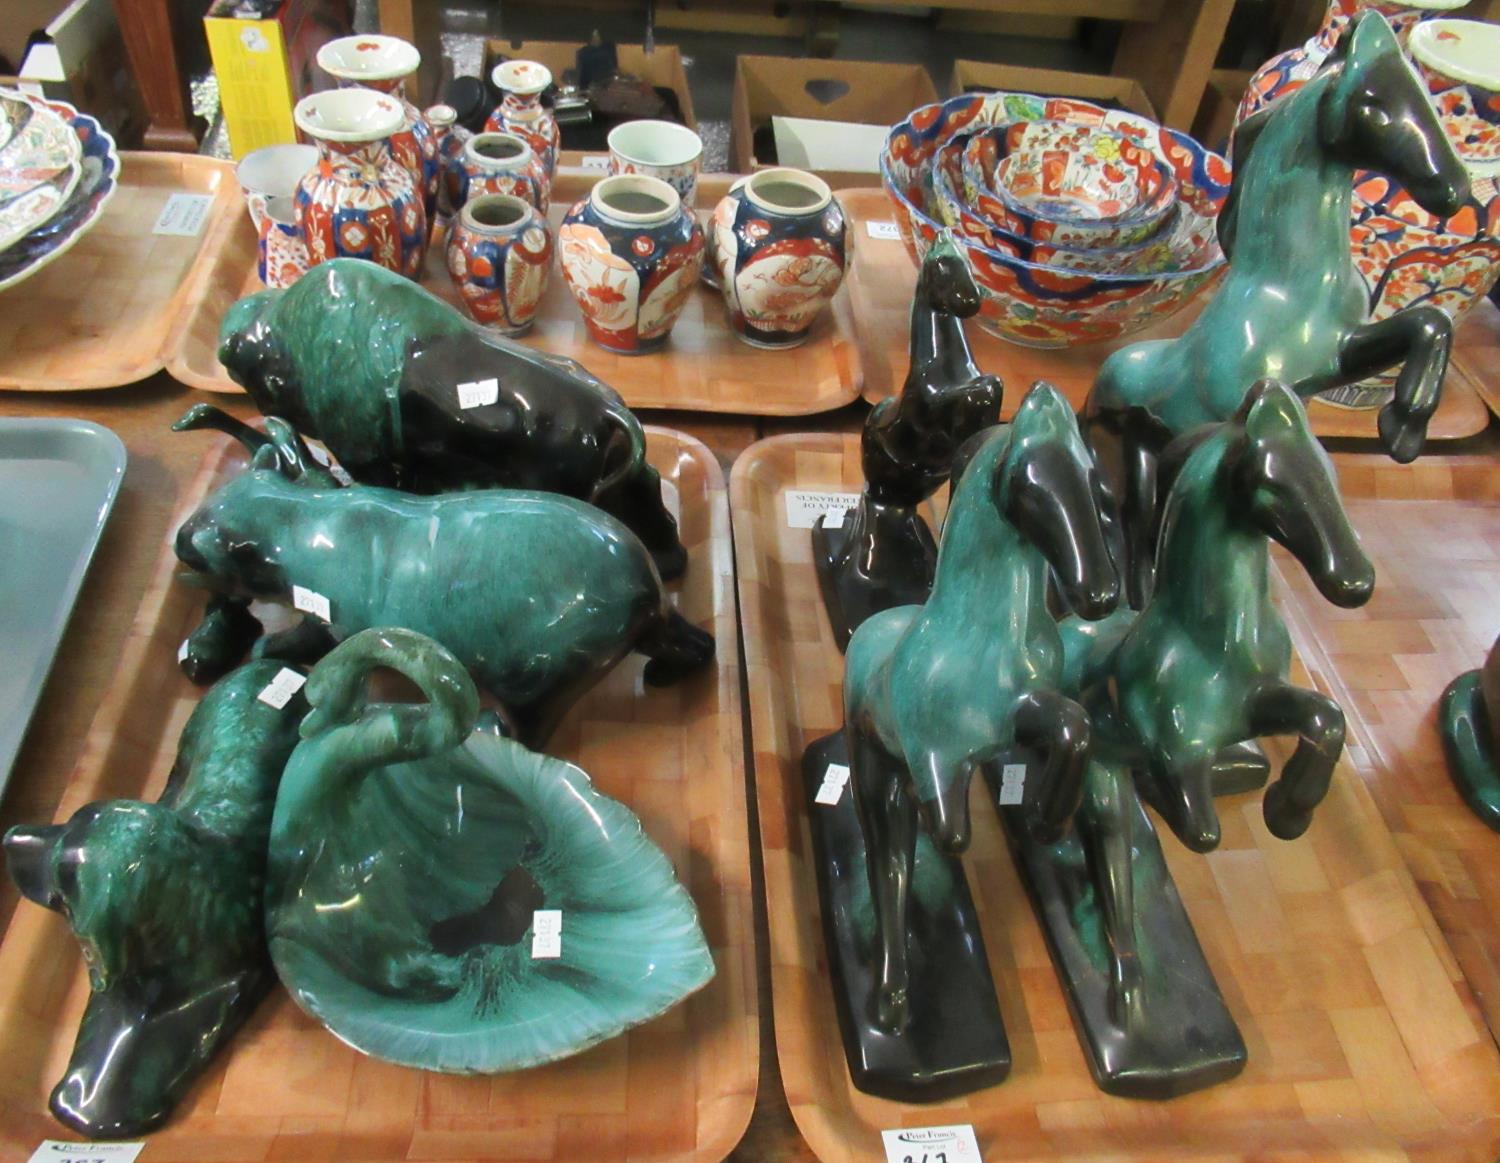 Four trays of Canadian hand crafted Blue Mountain pottery to include: figurines of dolphins, cats, - Image 2 of 2